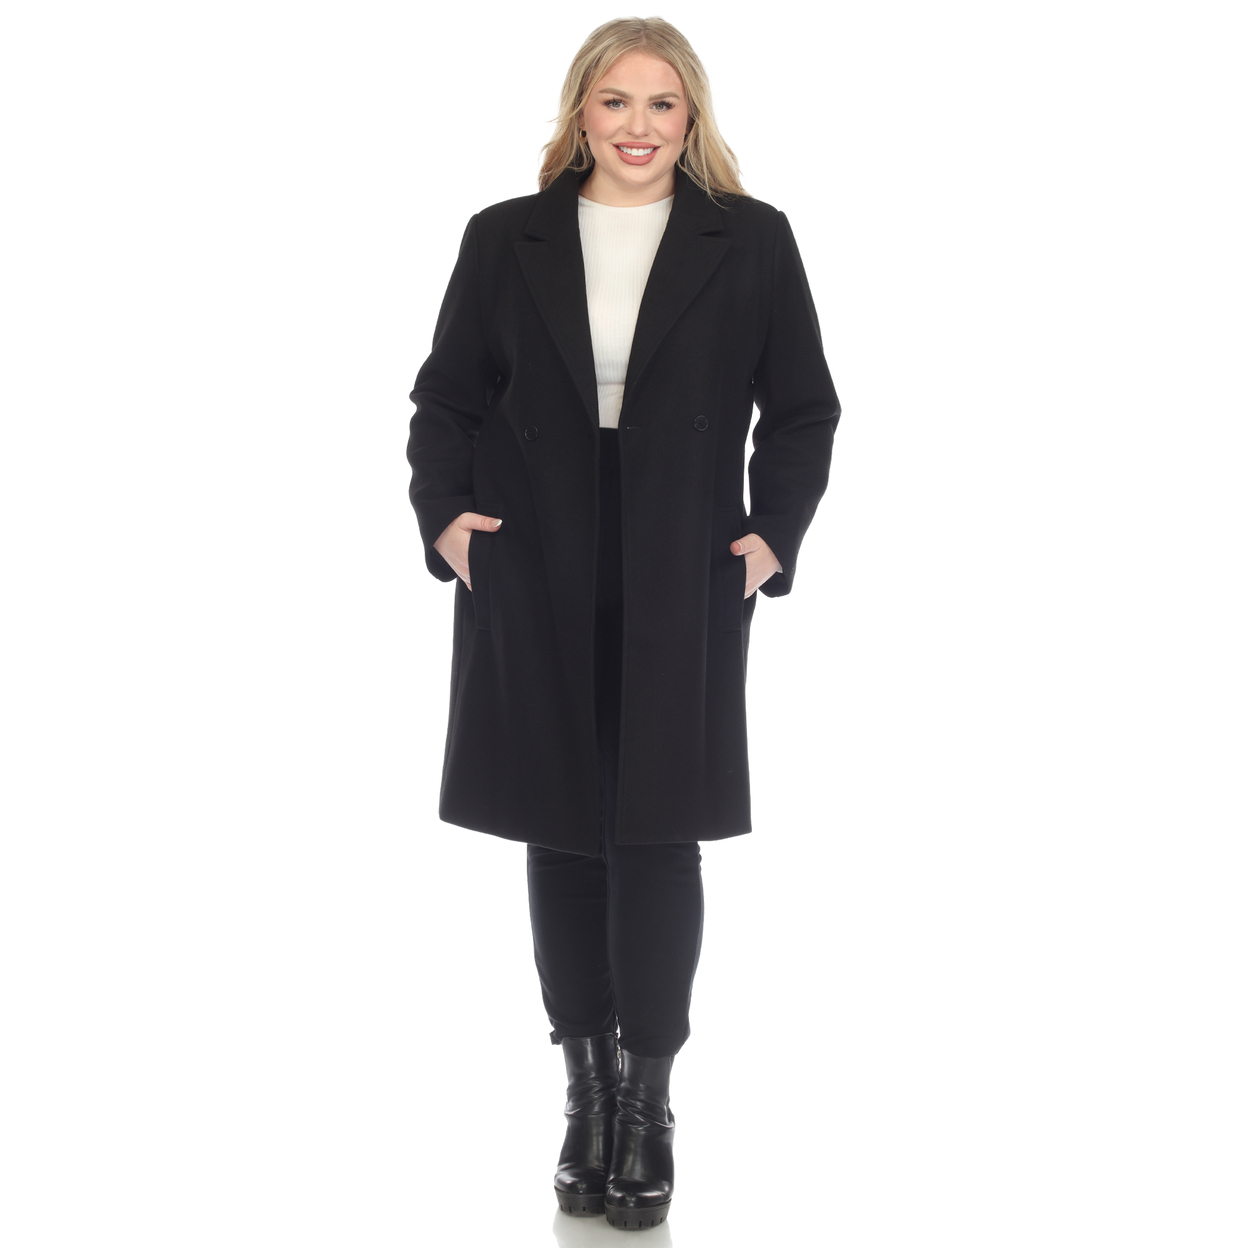 White Mark Women's Long Sleeve Classic Double-Breasted Walker Coat - Black, Small